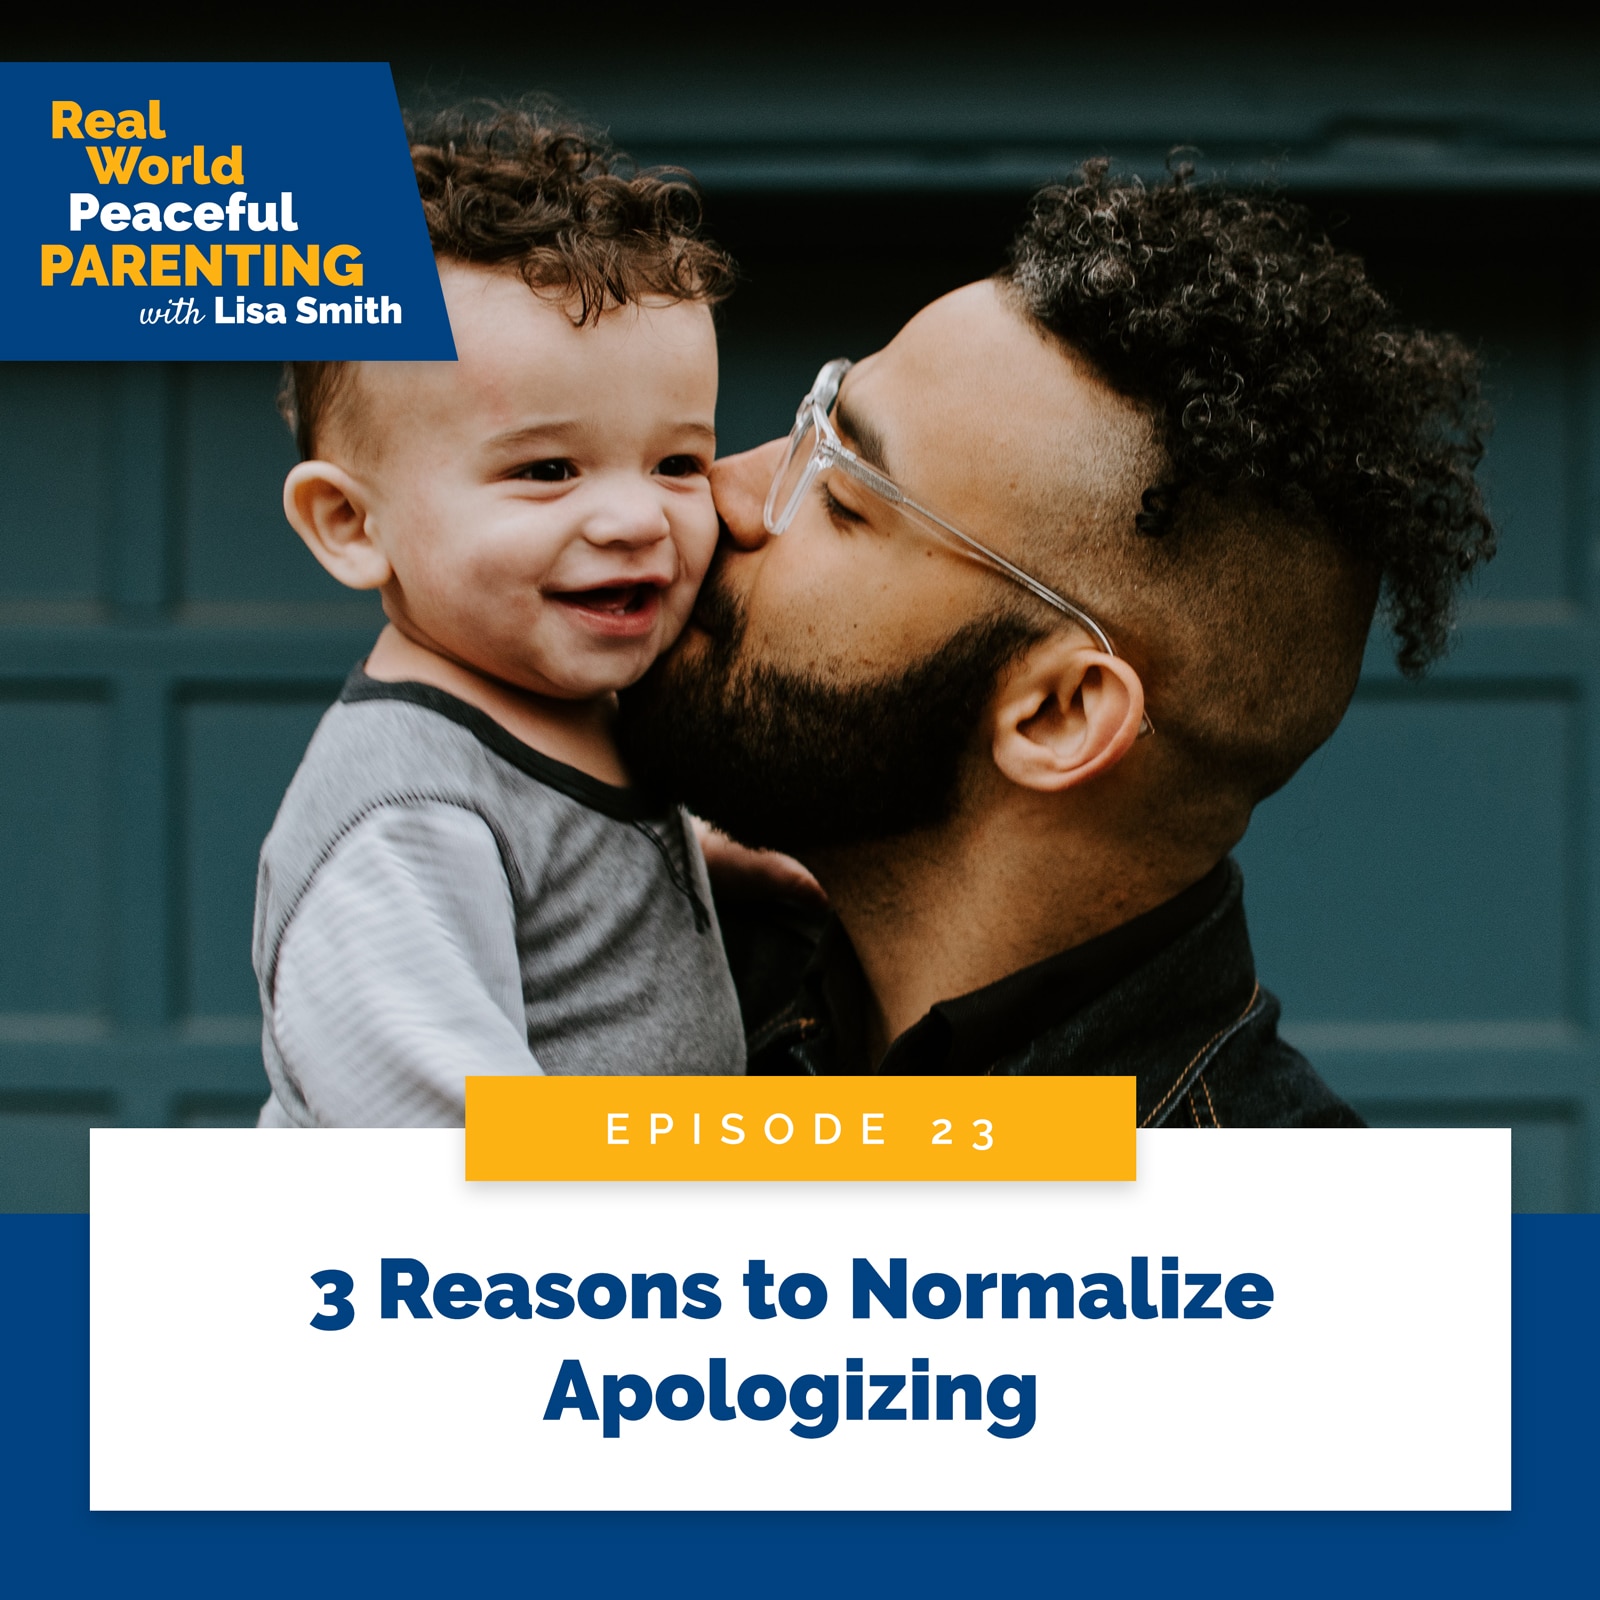 Real World Peaceful Parenting with Lisa Smith | 3 Reasons to Normalize Apologizing